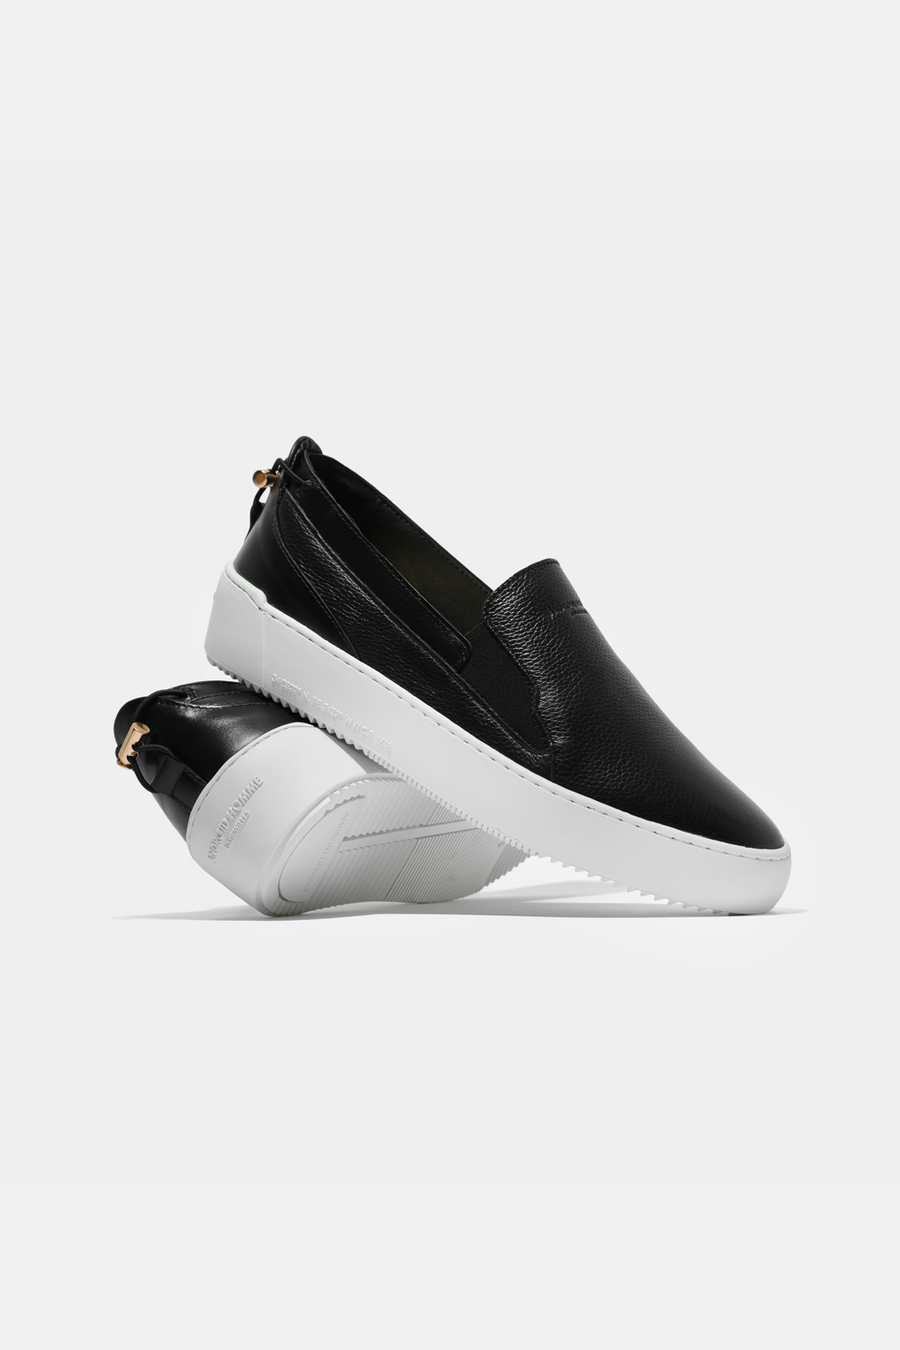 Buy the Android Homme Delta Slip Black Leather Hardware at Intro. Spend £50 for free UK delivery. Official stockists. We ship worldwide.